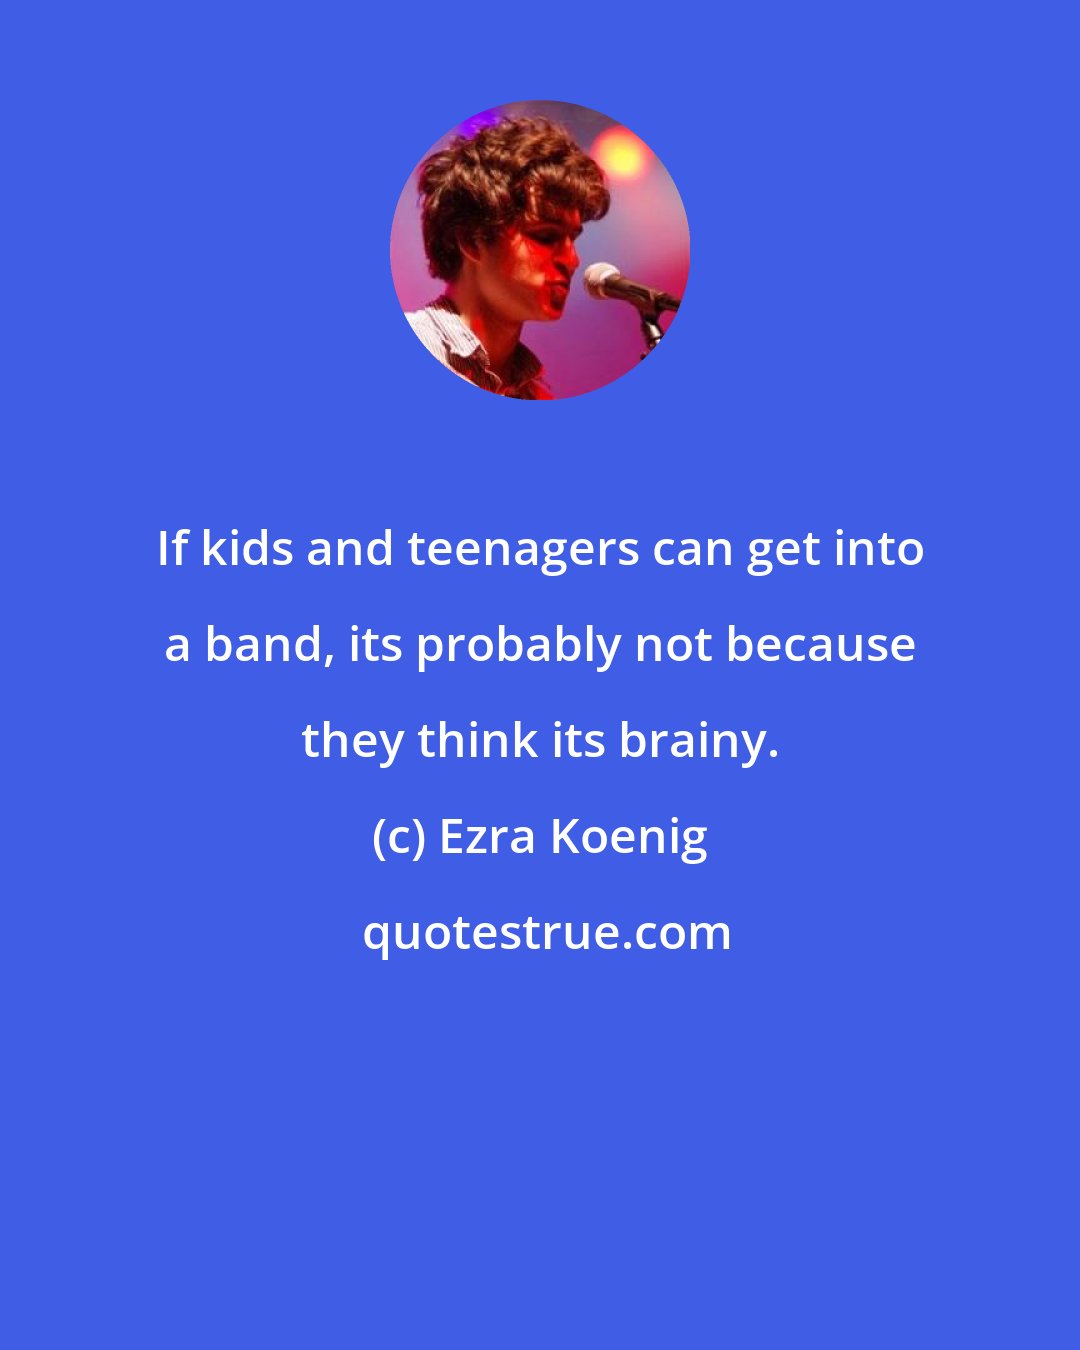 Ezra Koenig: If kids and teenagers can get into a band, its probably not because they think its brainy.